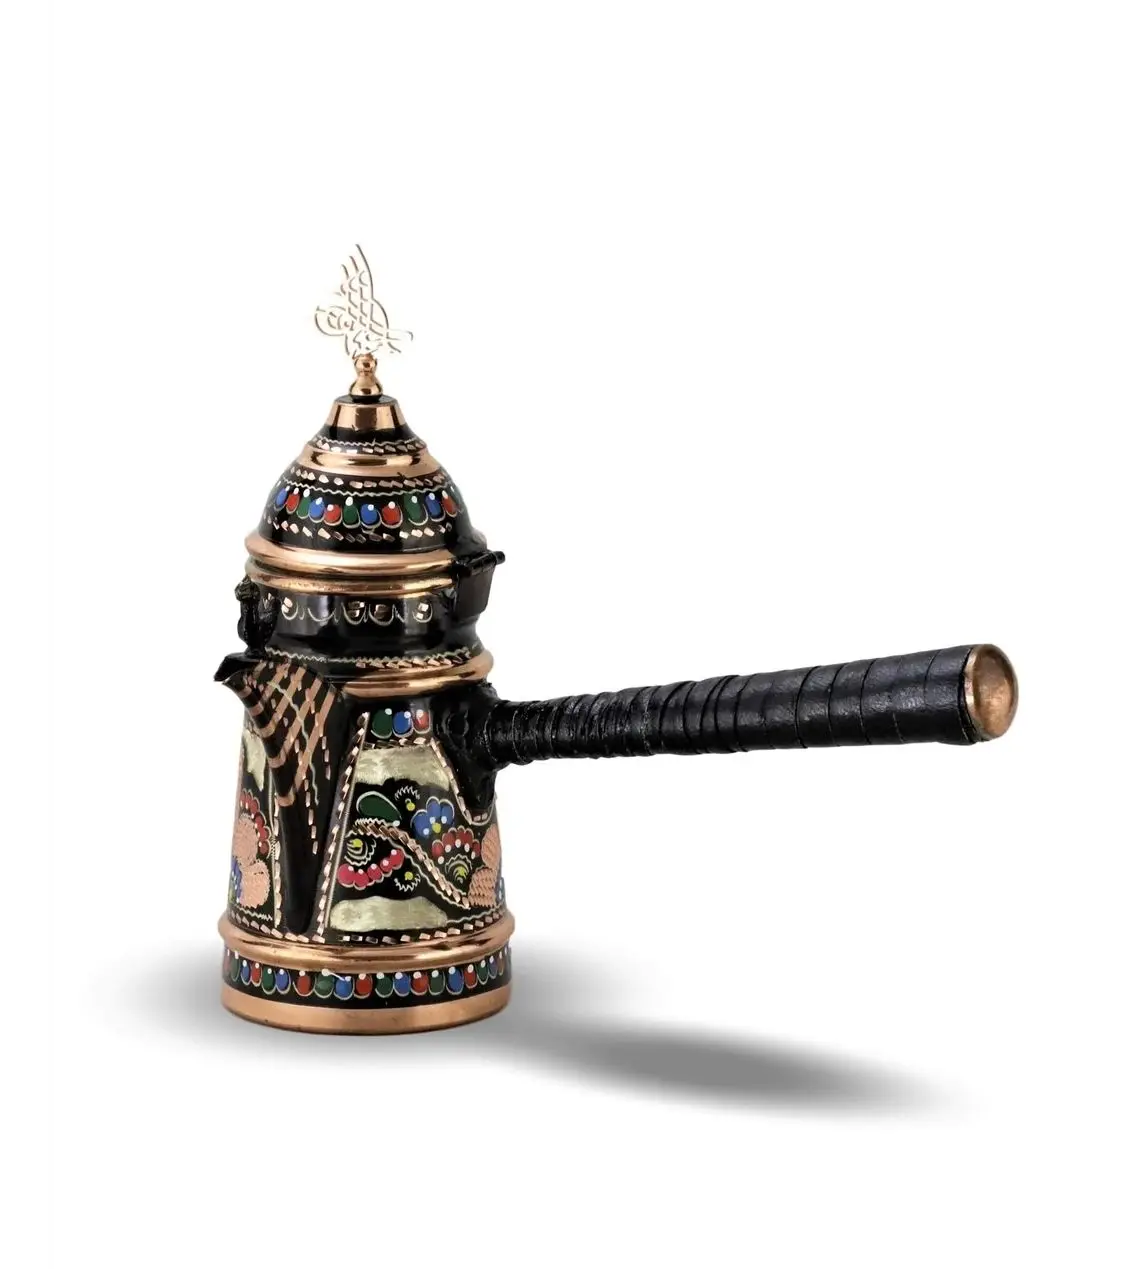 

Morya Mırra In Tin-Plated Copper Coffee Pot Ottoman Motif In the Traditional Style of Interest Is Intriguing Quality 4 - 5 Fincanlık Practical